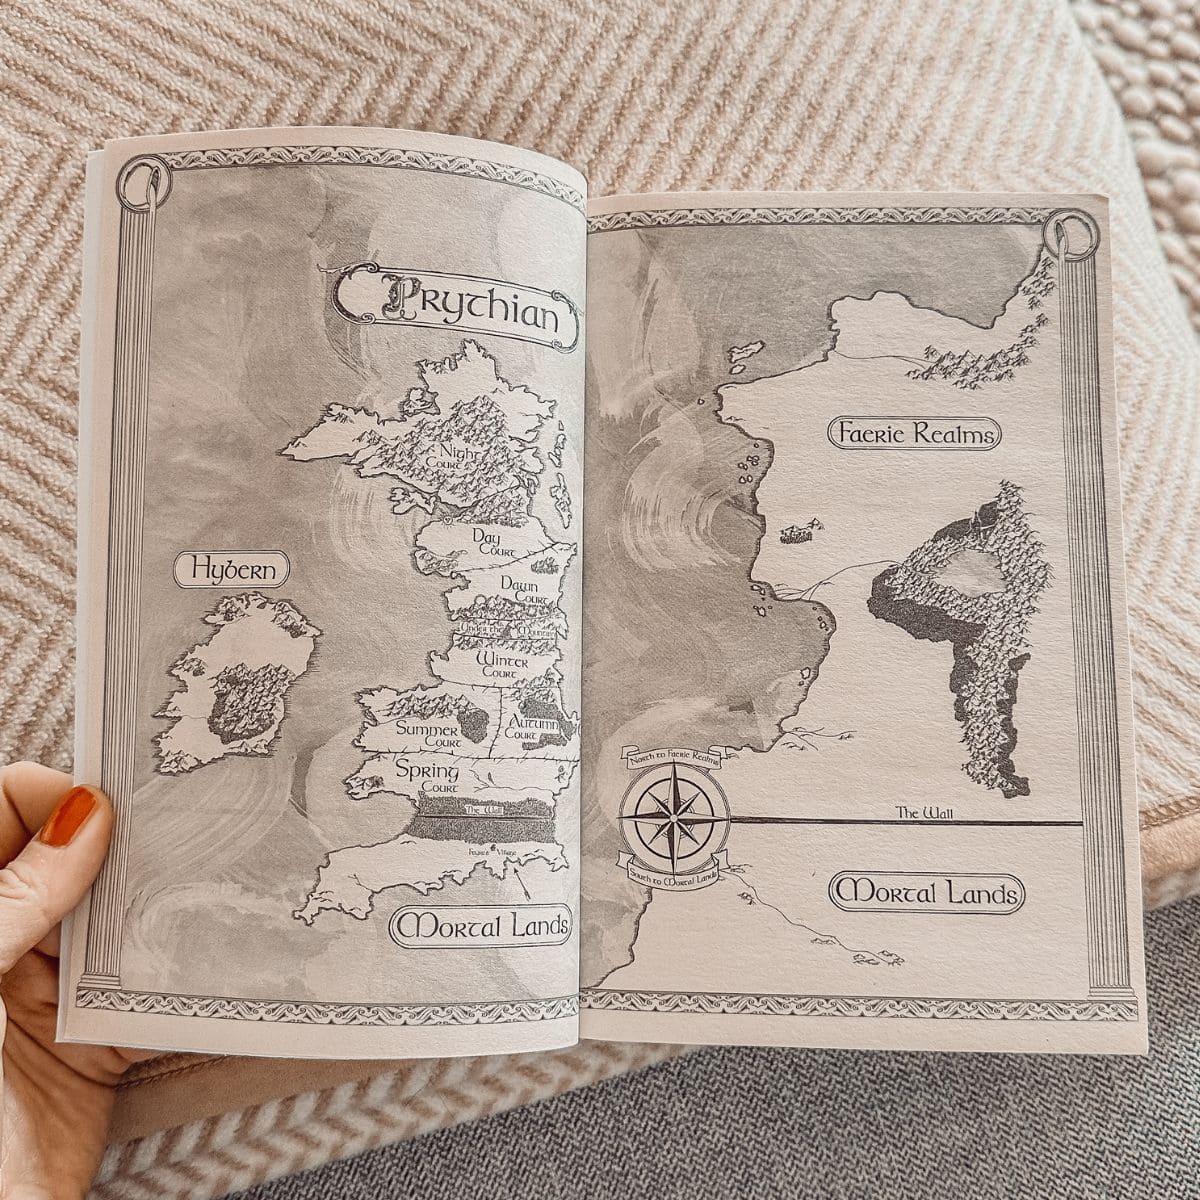 two page Acotar map in the book.